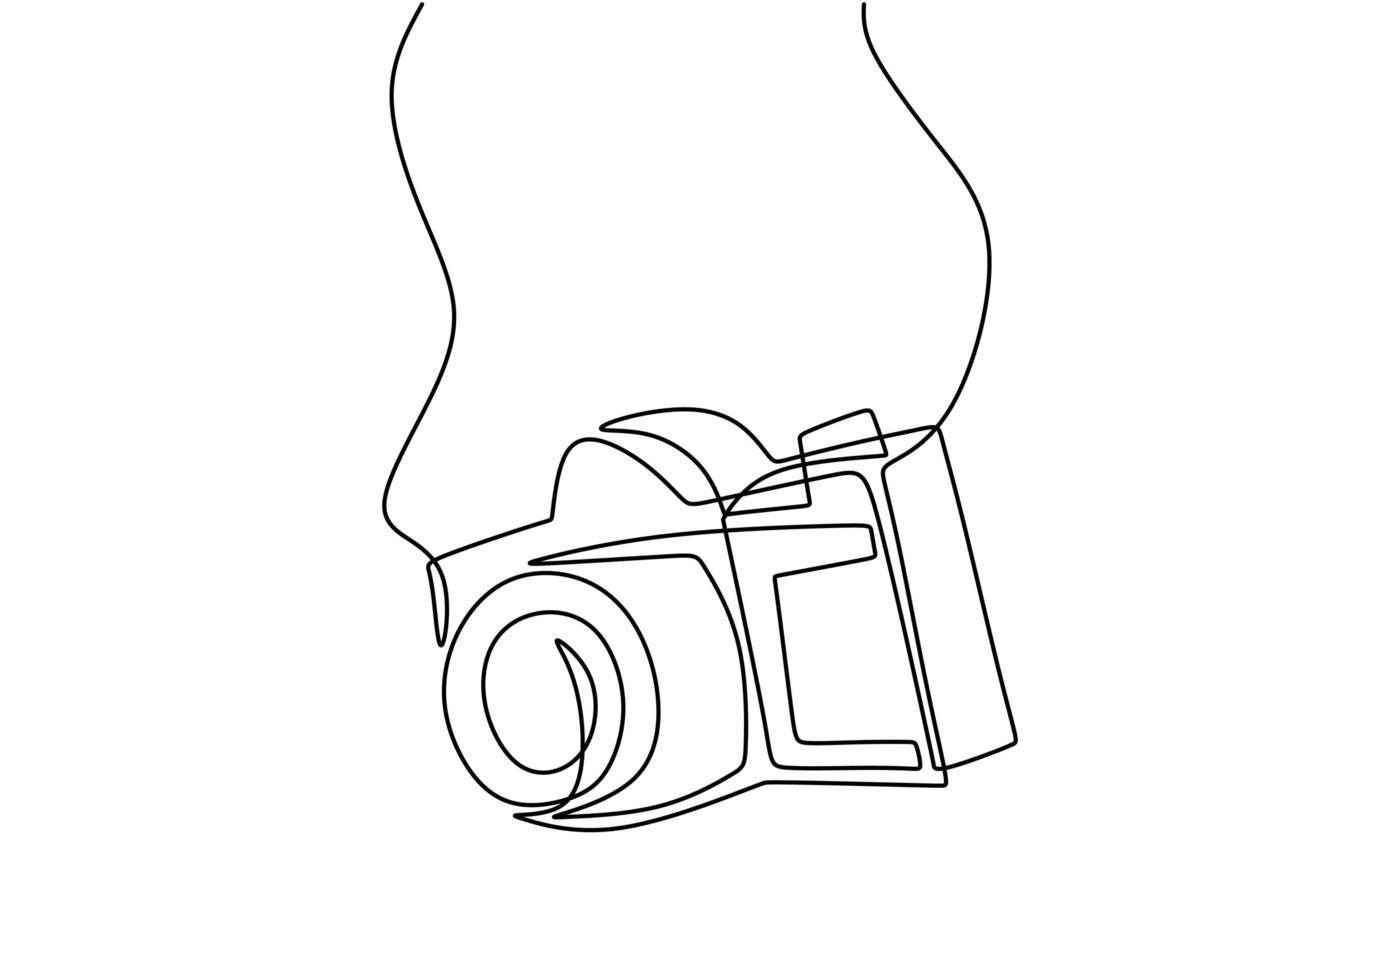 One line camera design. DSLR camera digital vector with single continuous line drawing minimalism linear style. Photography equipment concept isolated on white background vector design illustration